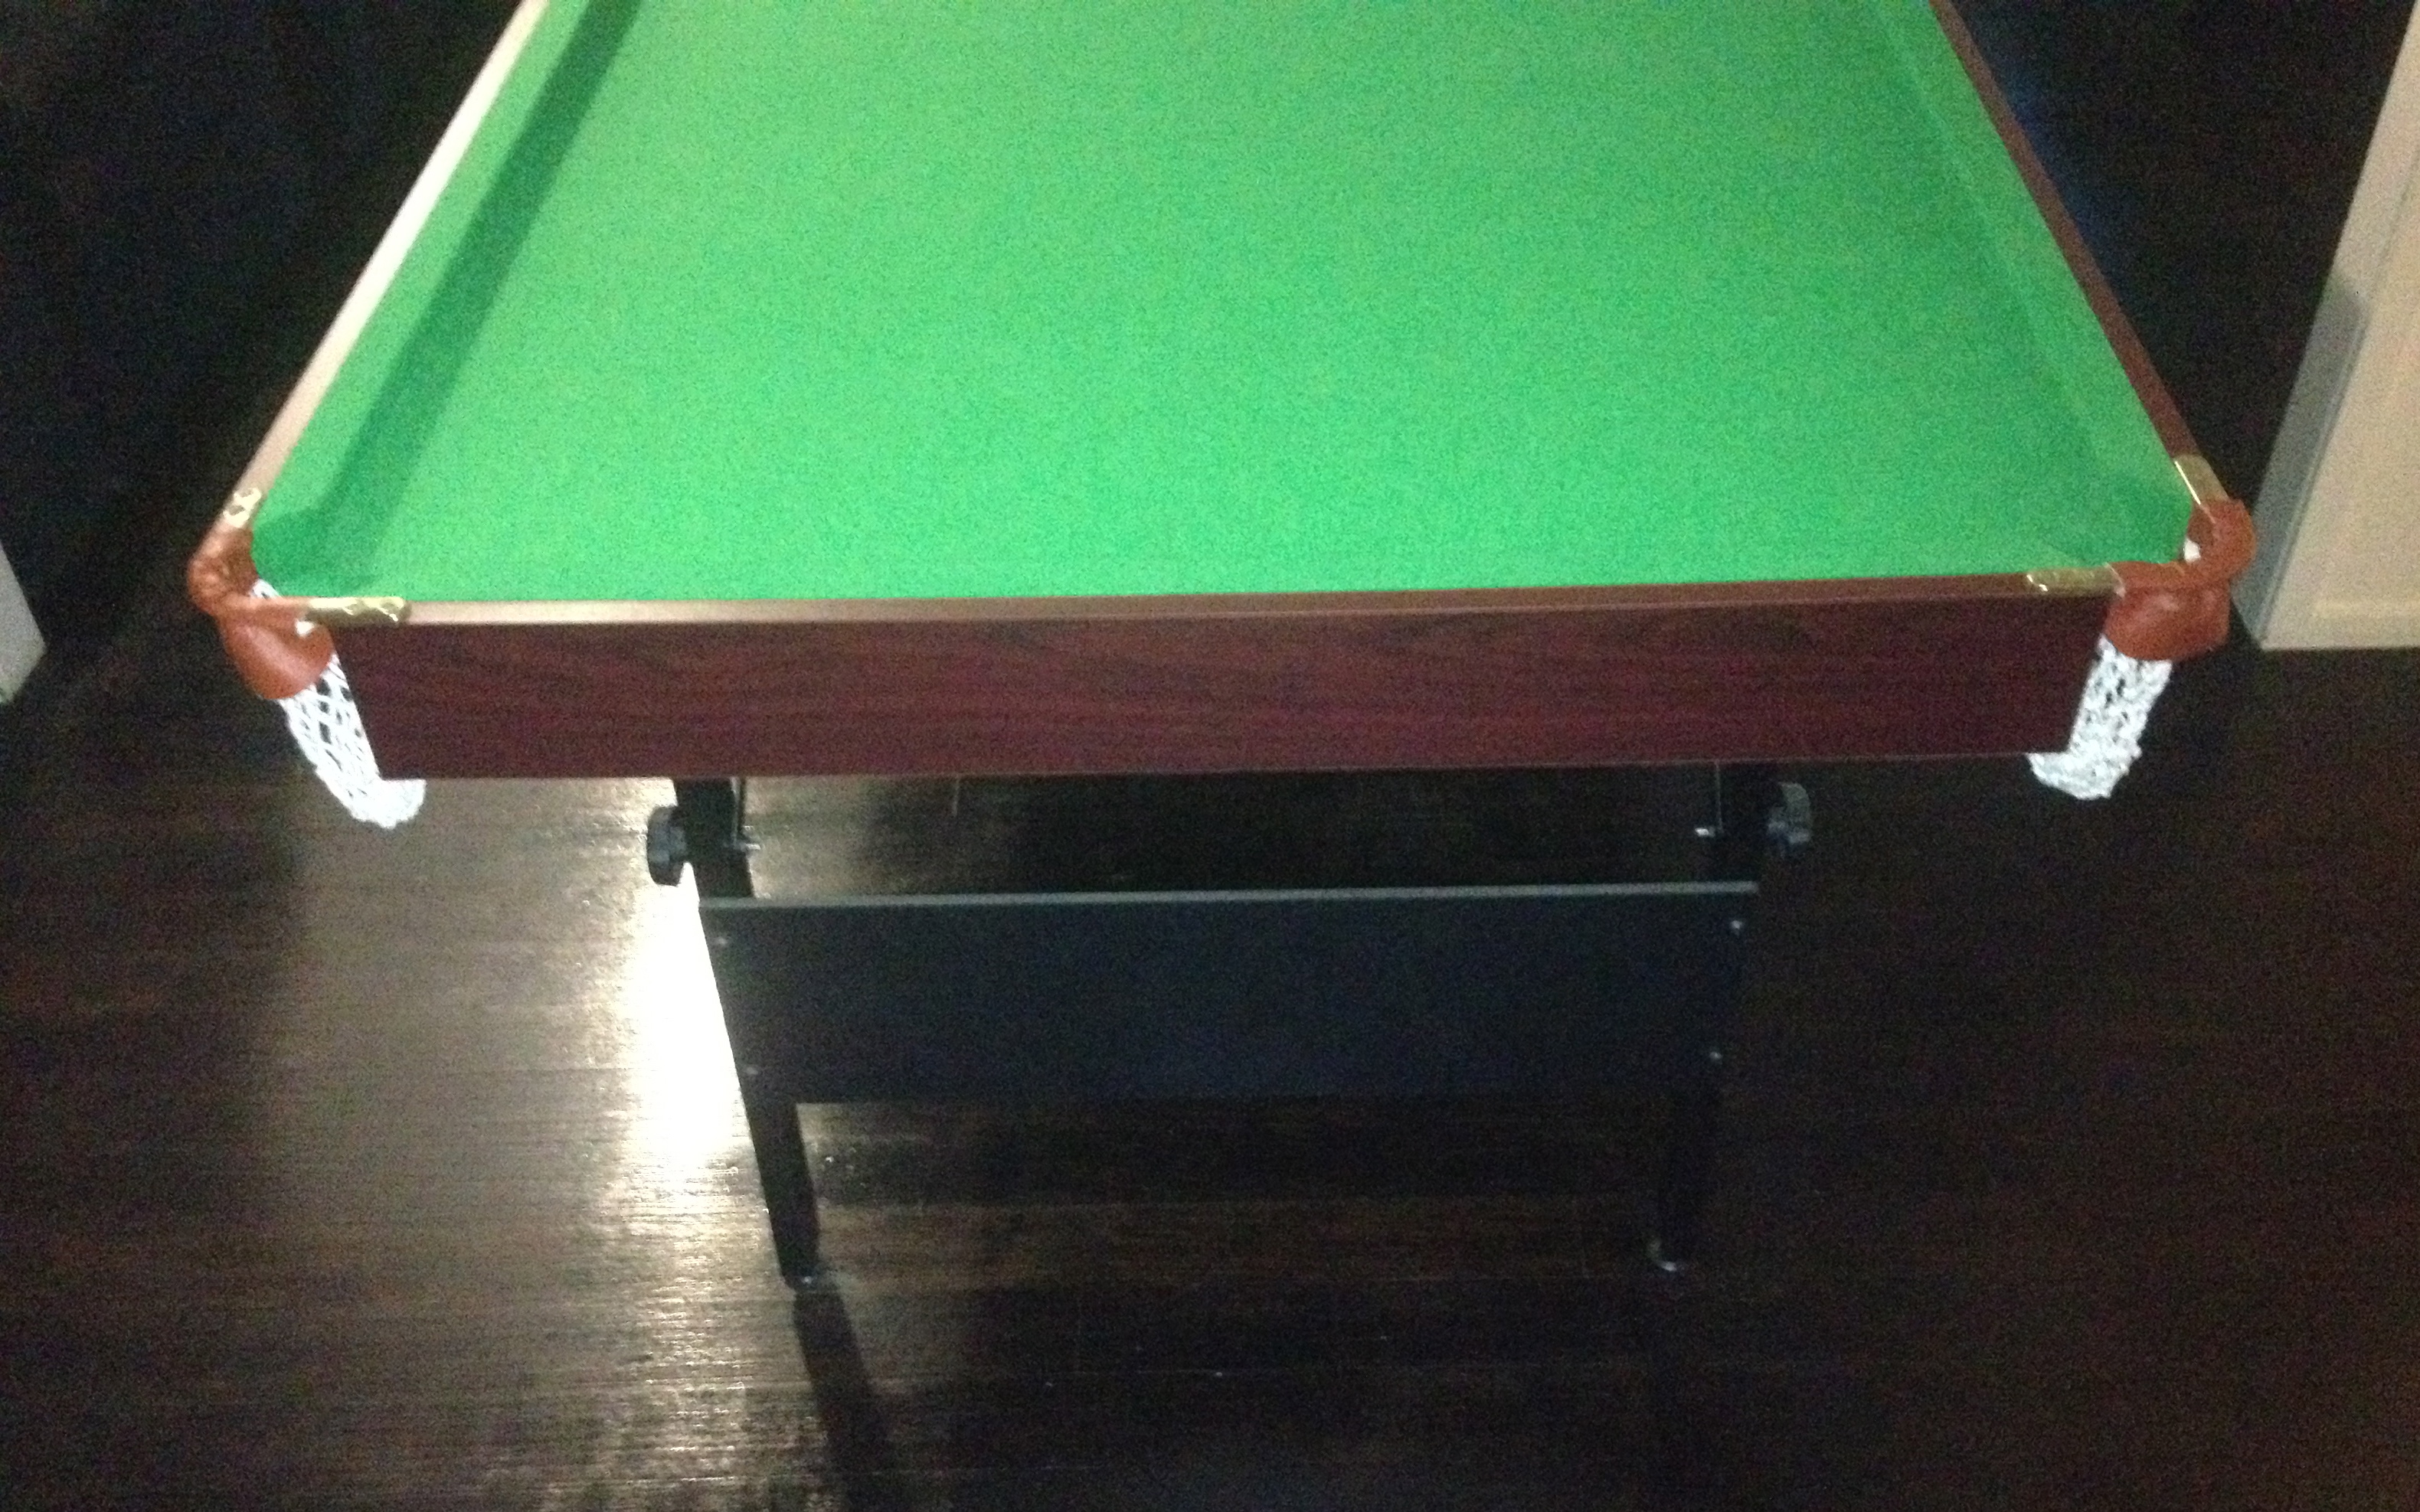 POOL Table With Foldable LEGS For Easy Storage. Comes With Accessories